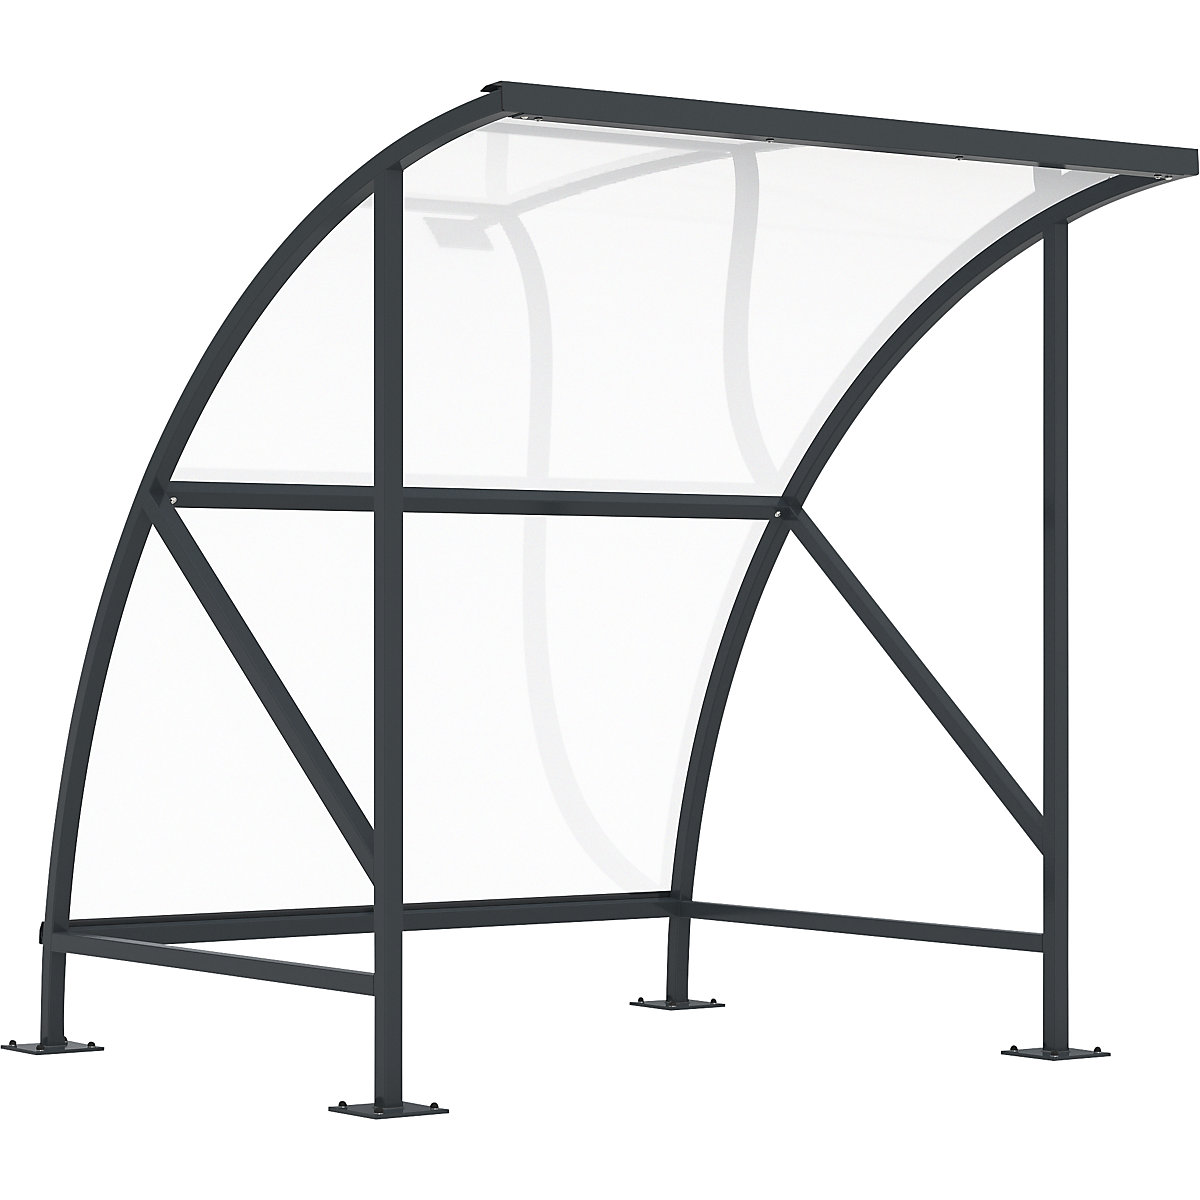 Bicycle shelter, made of polycarbonate, WxD 2090 x 2100 mm, charcoal RAL 7016-10